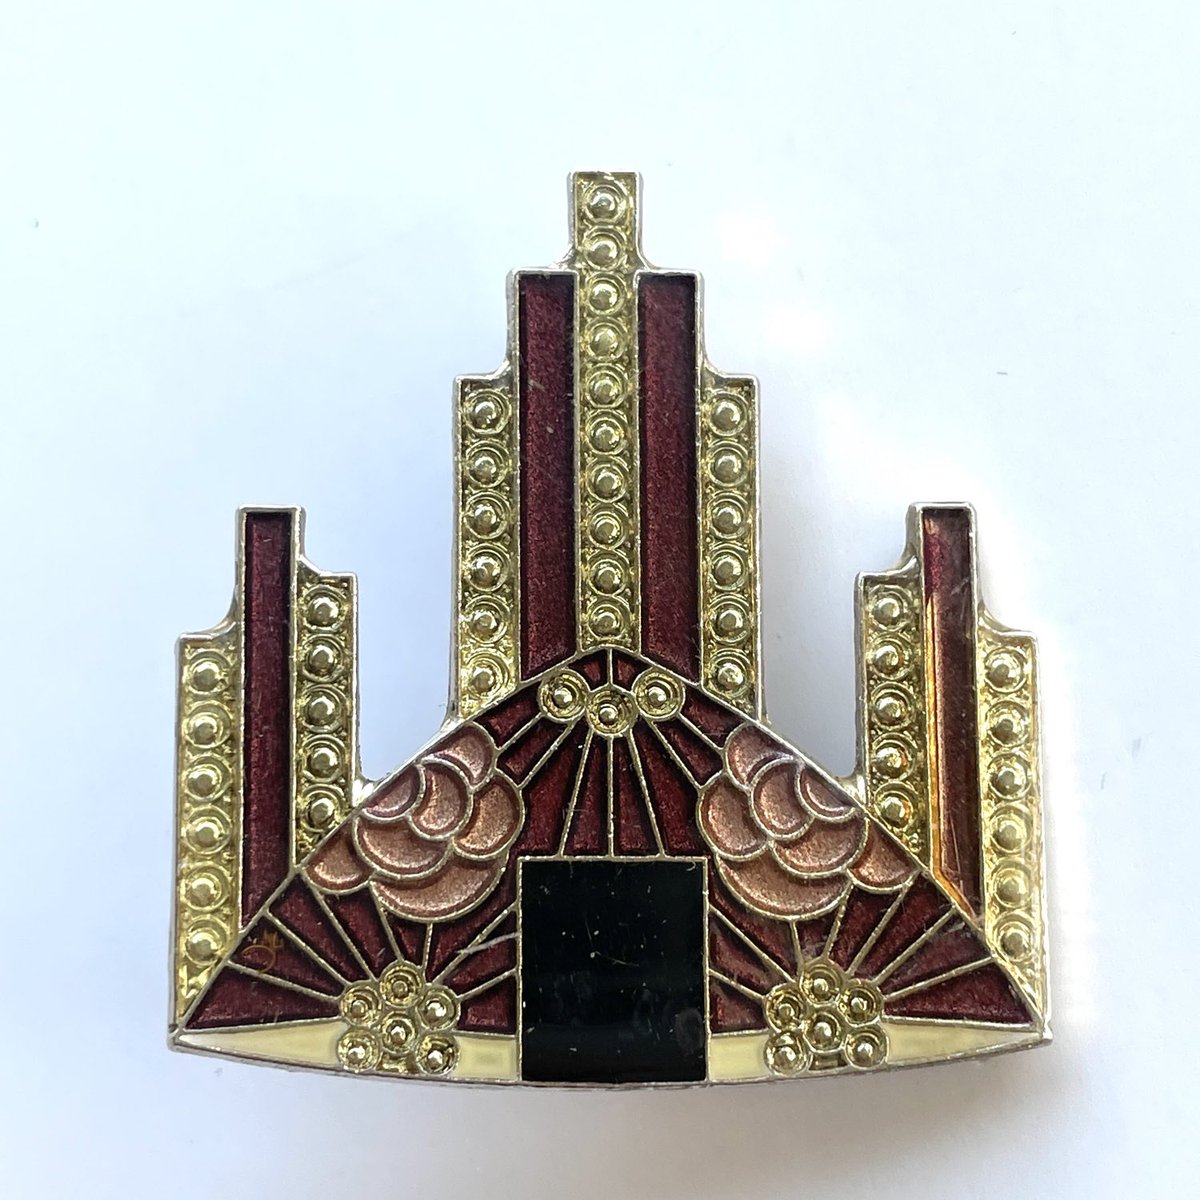 Excited to share the latest addition to my #etsy shop: Art deco brooch #artdeco #rarejewelry #rarebrooch #rareartdeco #floralartdeco #artdecostyle #artdeco #artdecojewelry #vintagejewelry #antiquejewelry #jewelryshop #giftshop #vintageshop #antiqueshop etsy.me/3ly3ihs